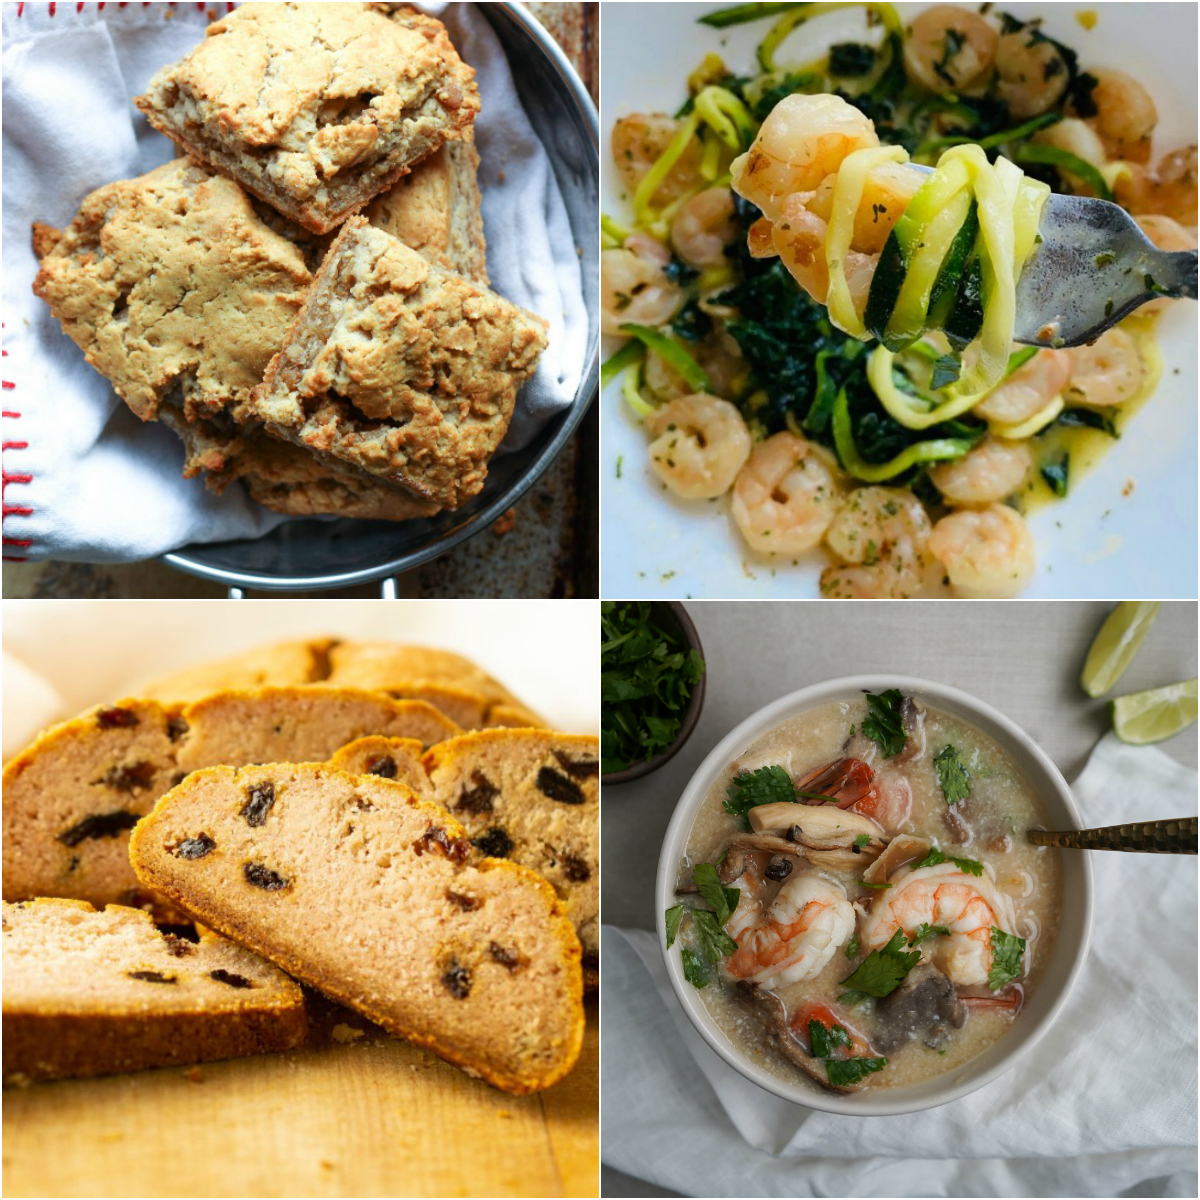 Paleo AIP Recipe Roundtable #308 | Phoenix Helix - *Featured Recipes: Sausage Biscuits, Irish Soda Bread, Tuscan Garlic Shrimp & Zucchini Noodles, and Coconut Shrimp Soup & Oyster Mushrooms